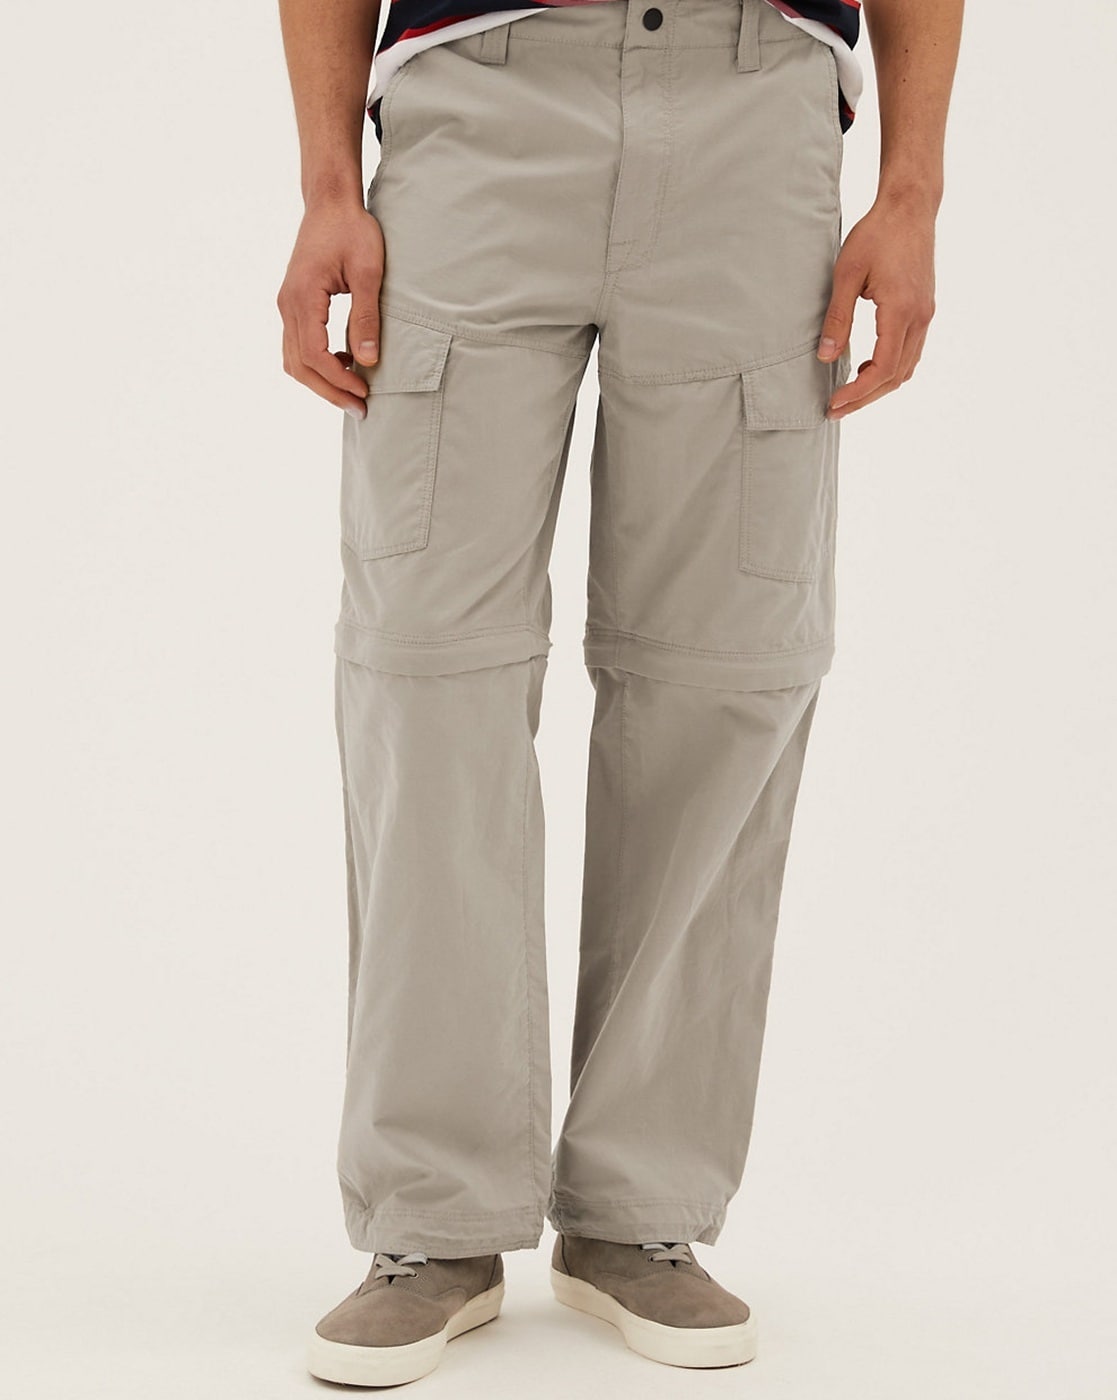 Buy Marks  Spencer Formal Trousers online  Women  7 products   FASHIOLAin